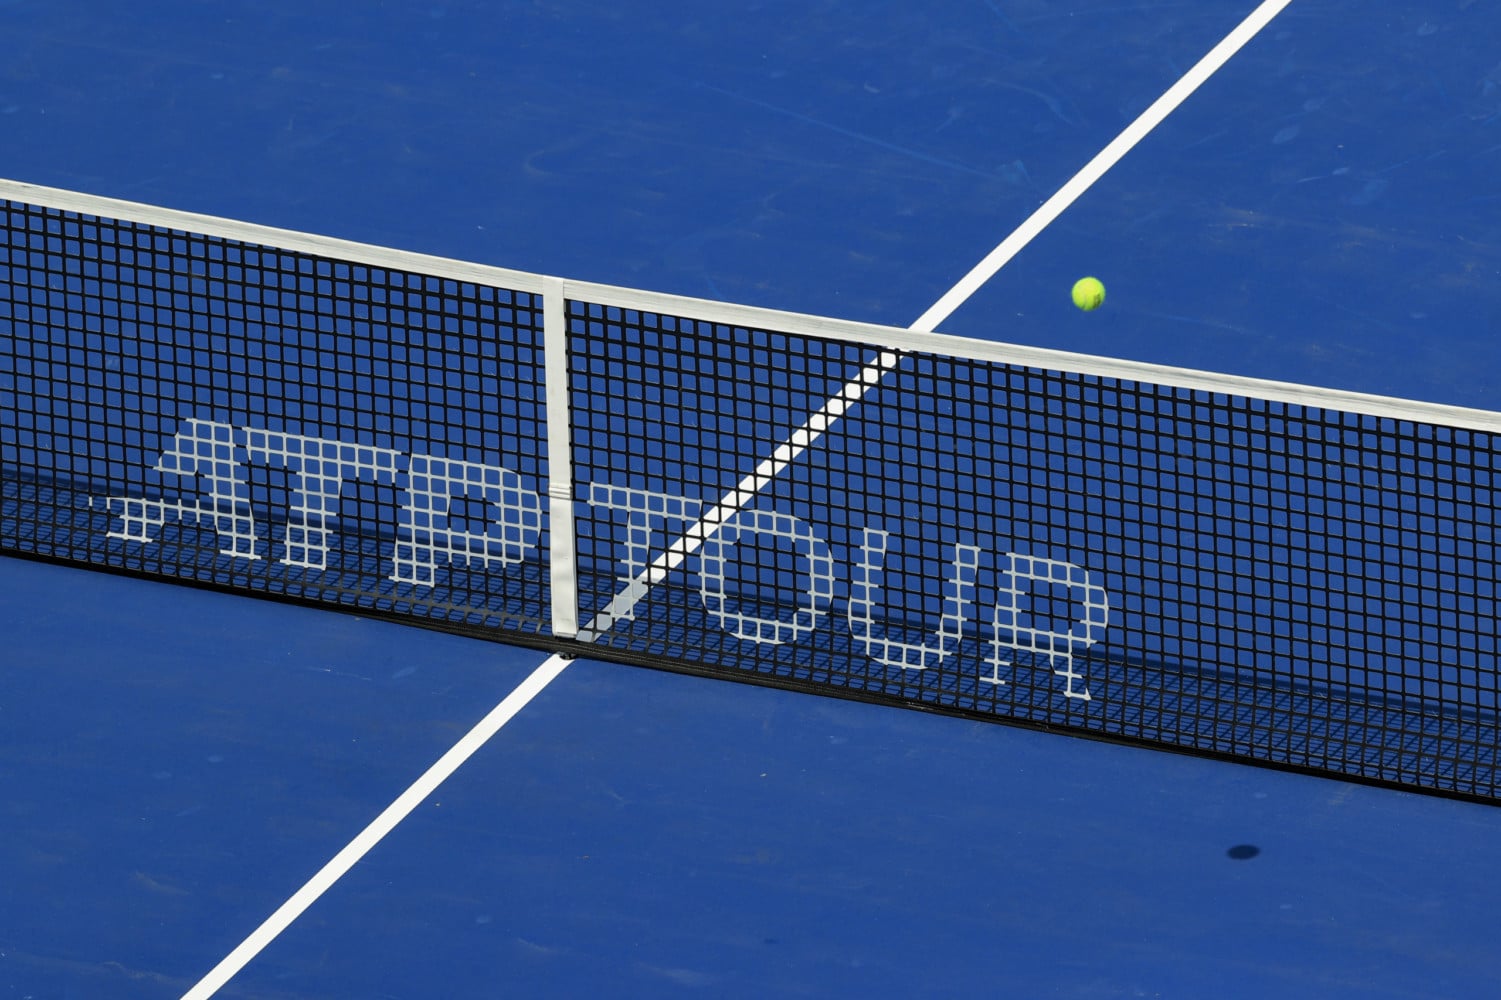 Players and tournaments to share profits, as ATP strategic plan signed off